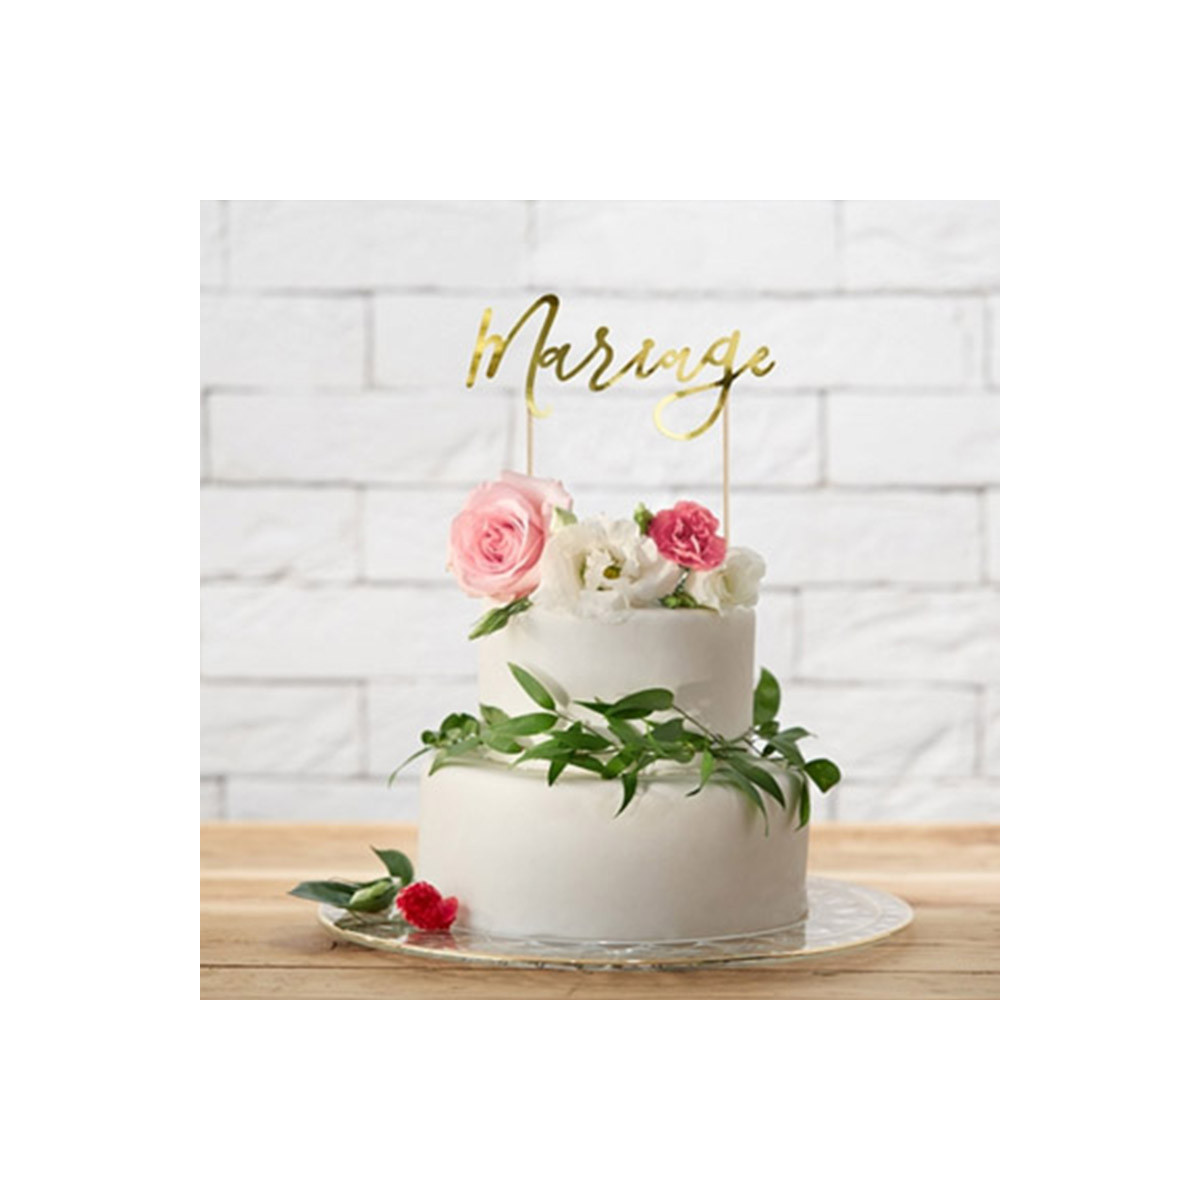 Cake Topper Mariage Or